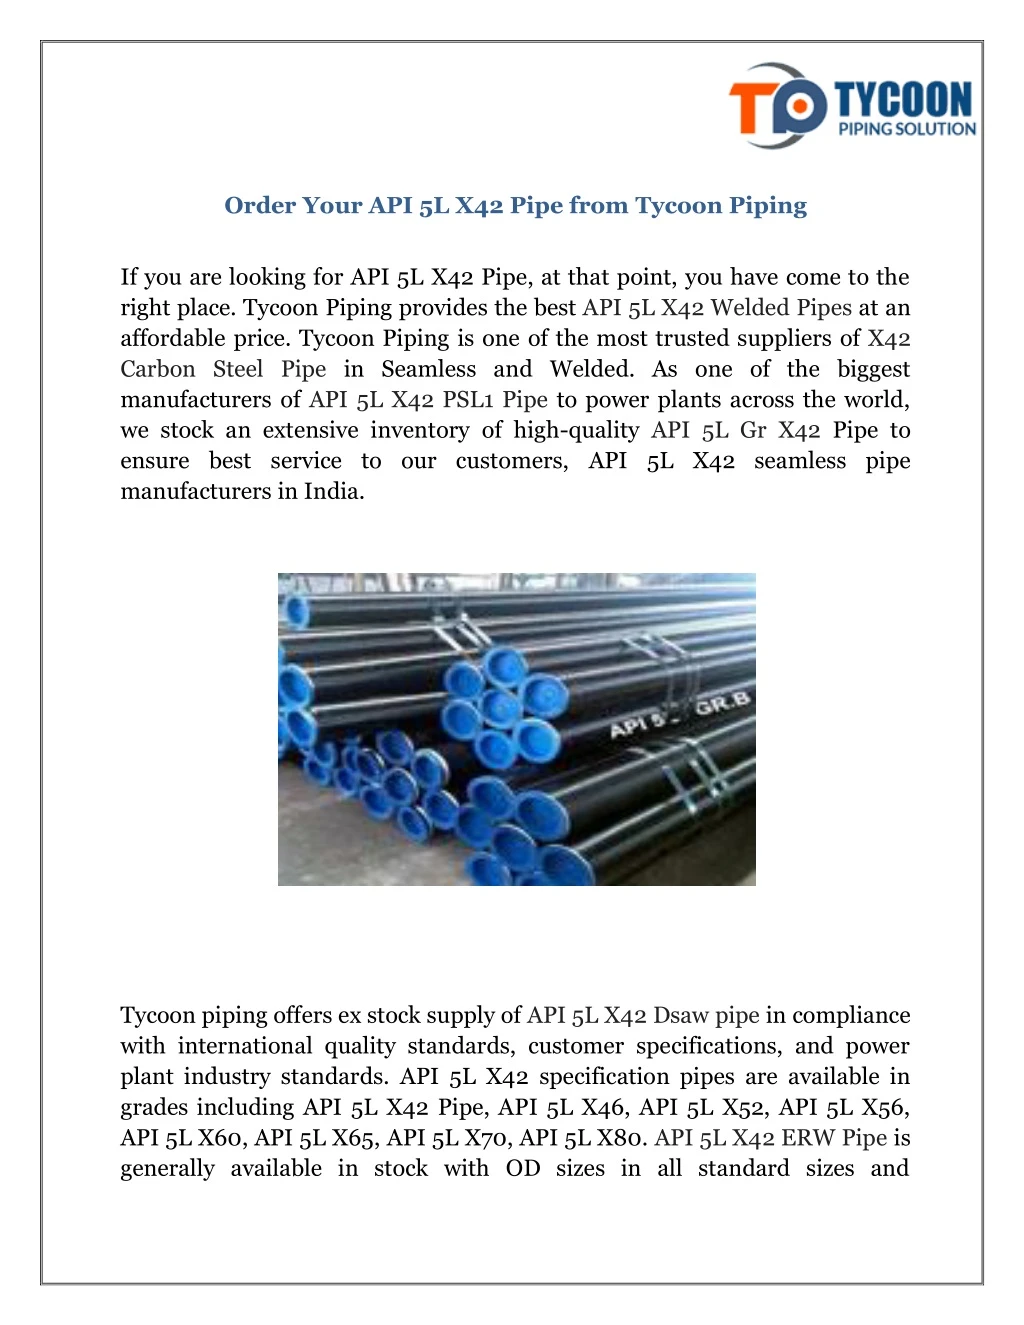 order your api 5l x42 pipe from tycoon piping